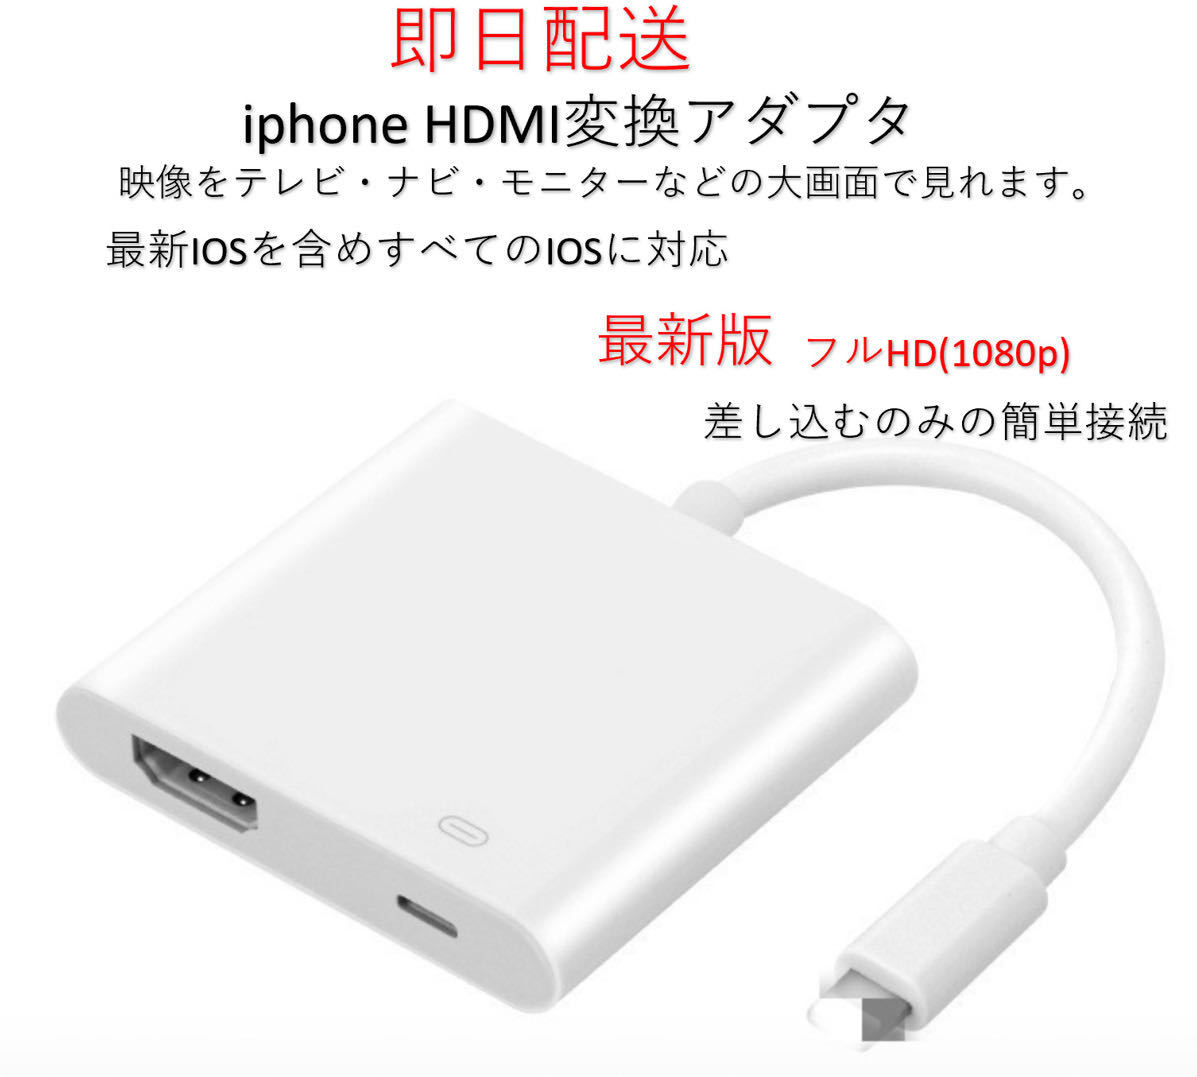 * newest version *MFI certification iPhone HDMI conversion adapter lightning connection cable adapter HDMI cable wire mirror ring setting un- necessary ( original box none )